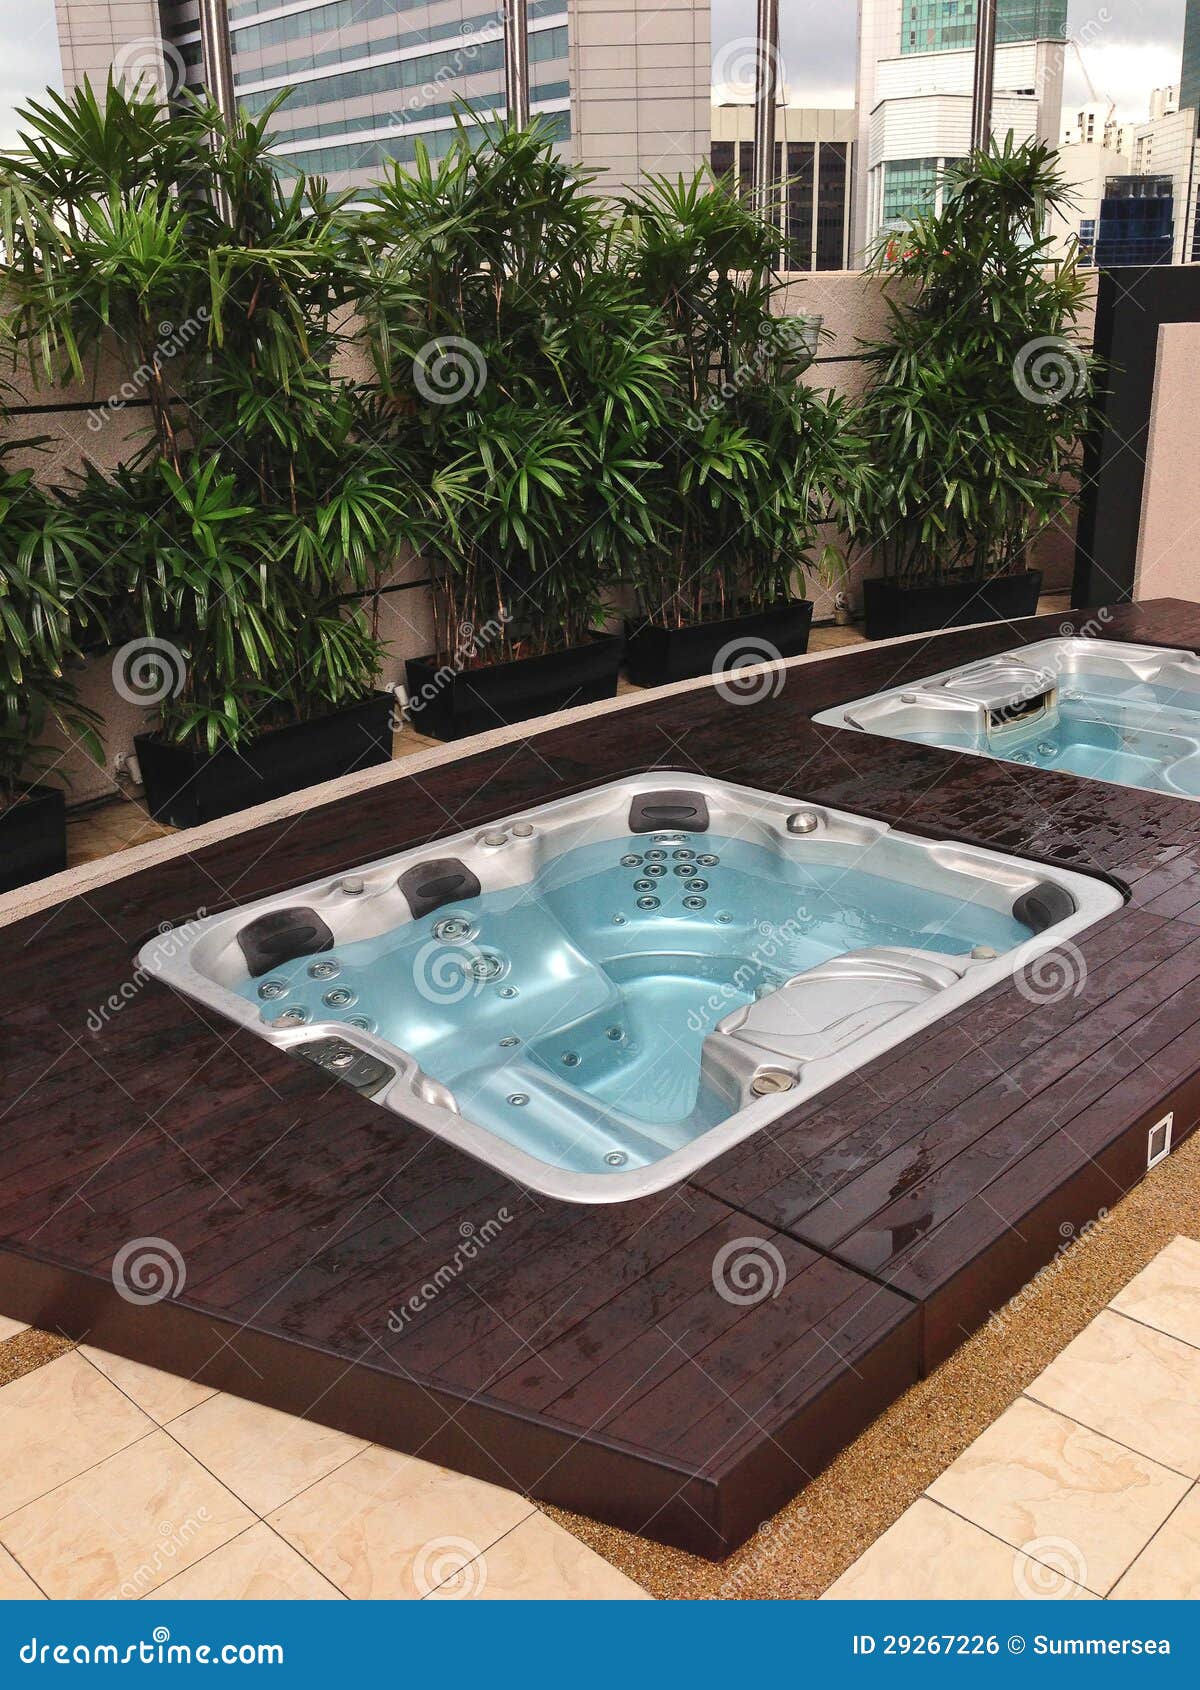 Outdoor Jacuzzi In The City Royalty Free Stock Image - Image: 29267226